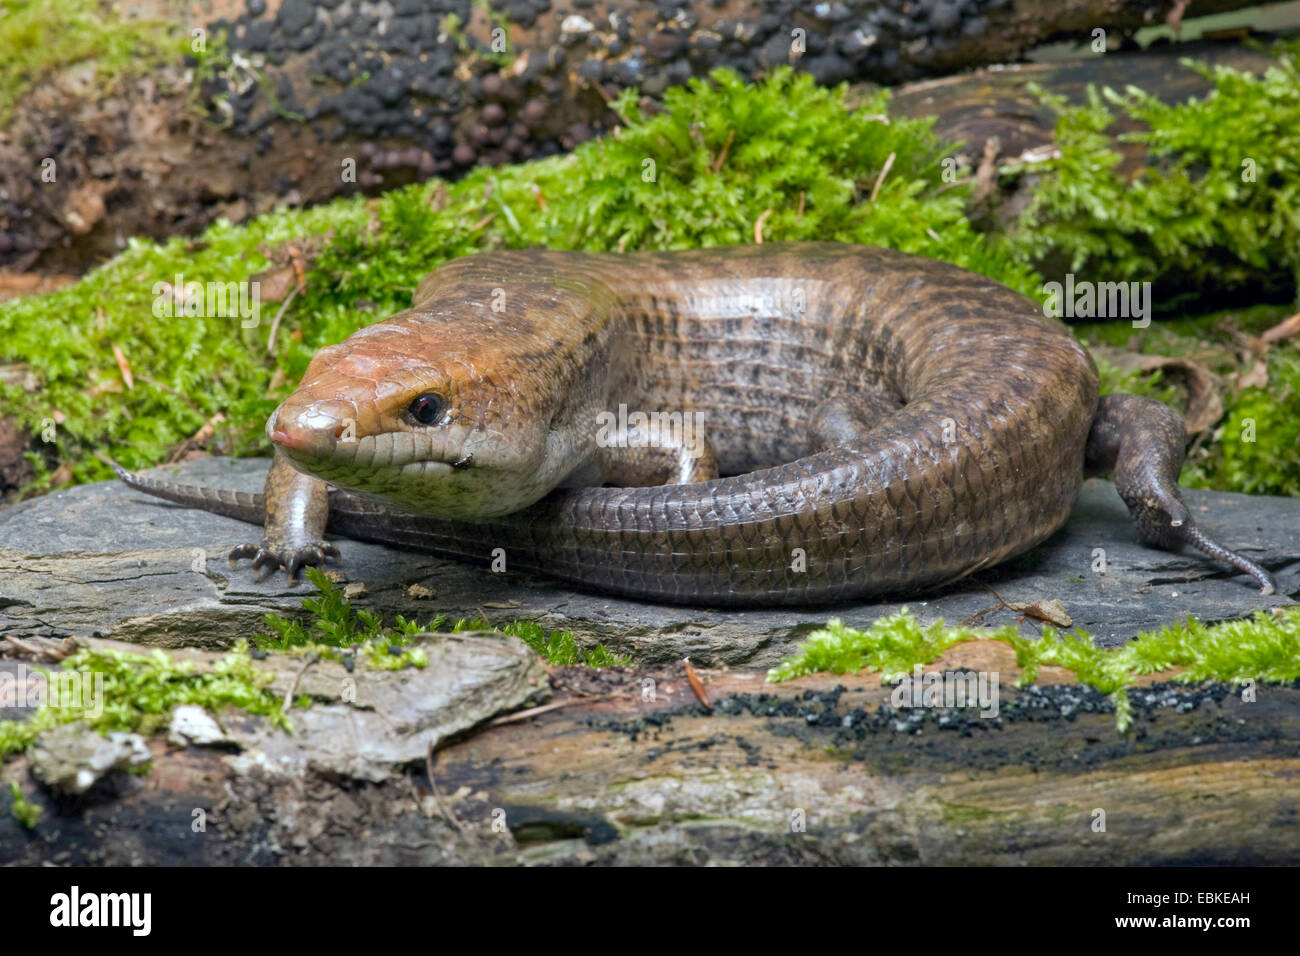 Great fire lizard (Diploglossus monotropis), rolled-up Stock Photo